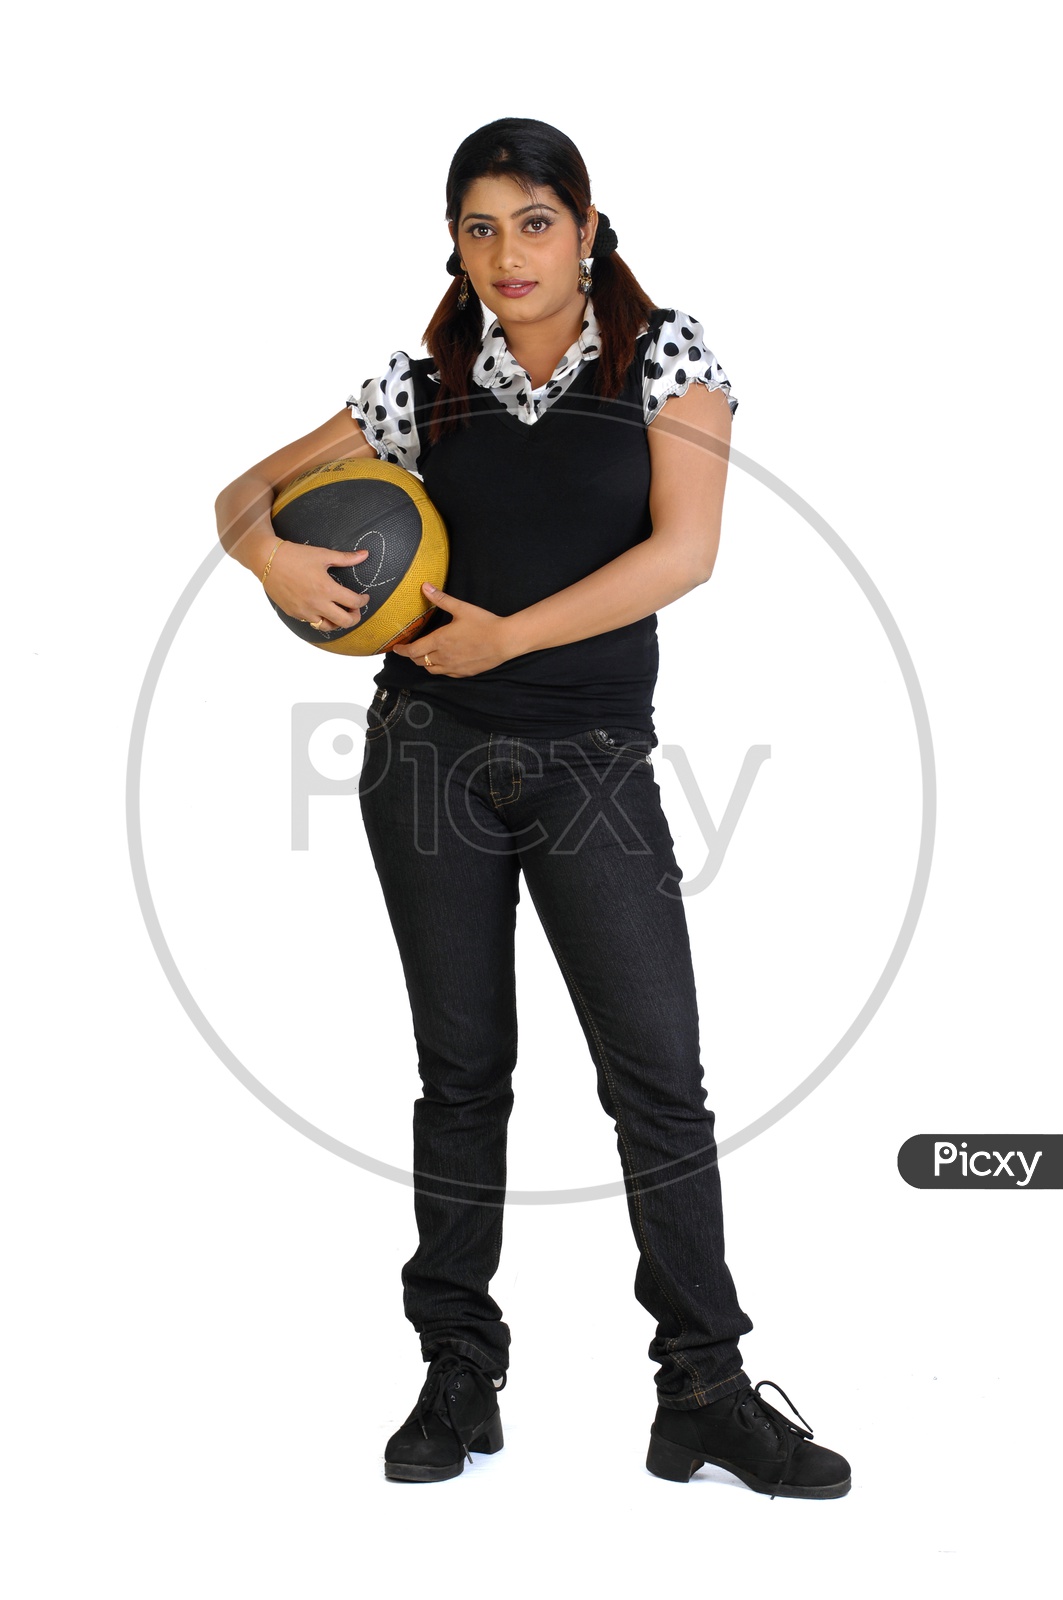 Indian Woman holding a throw ball